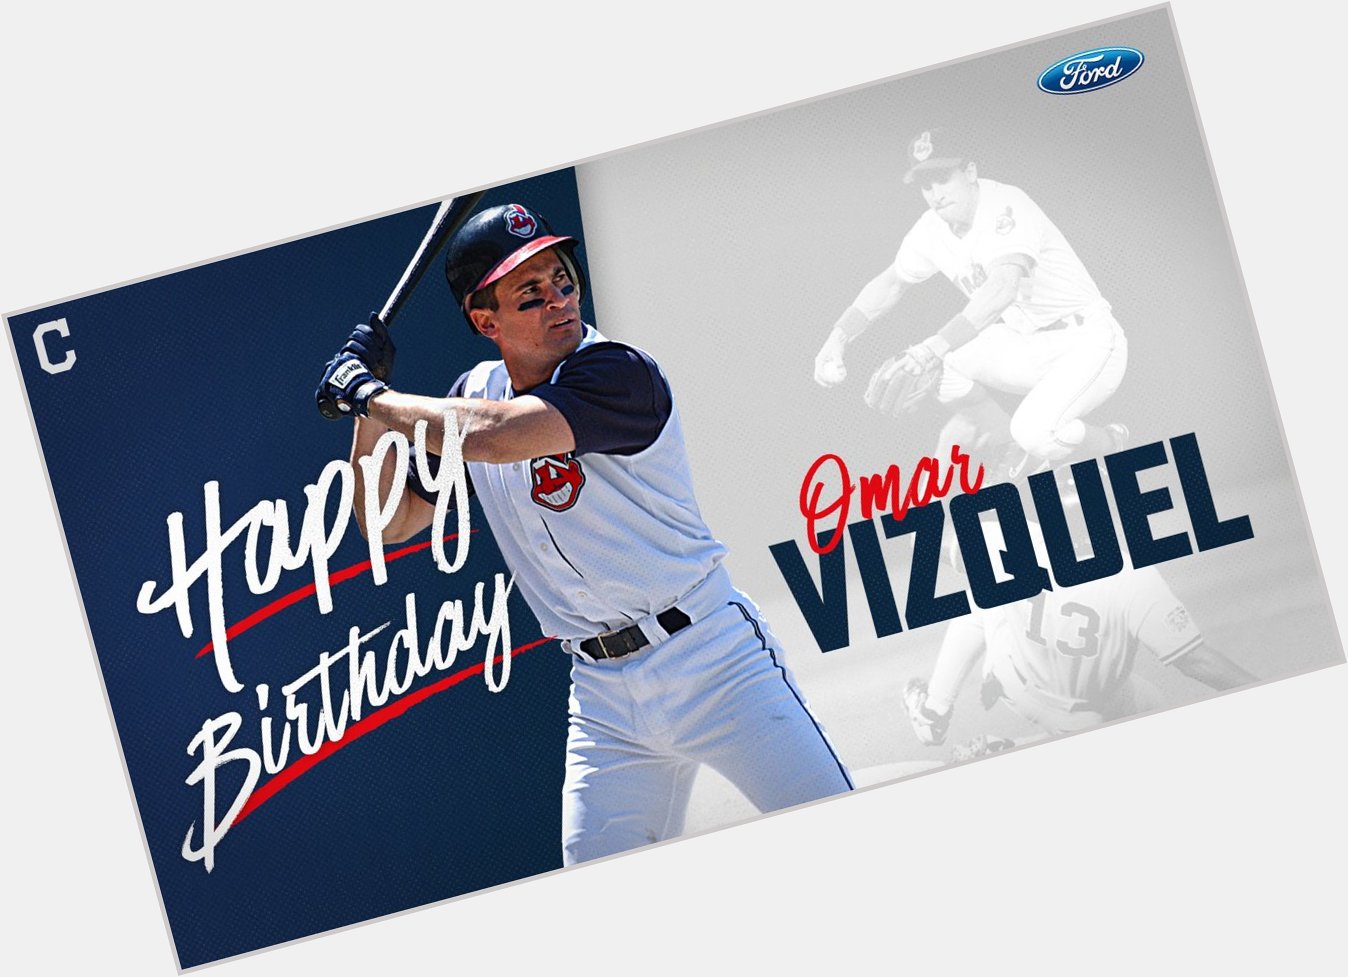 Happy birthday to Tribe legend Omar Vizquel!

Nobody had a better glove than the should-be Hall of Famer. 